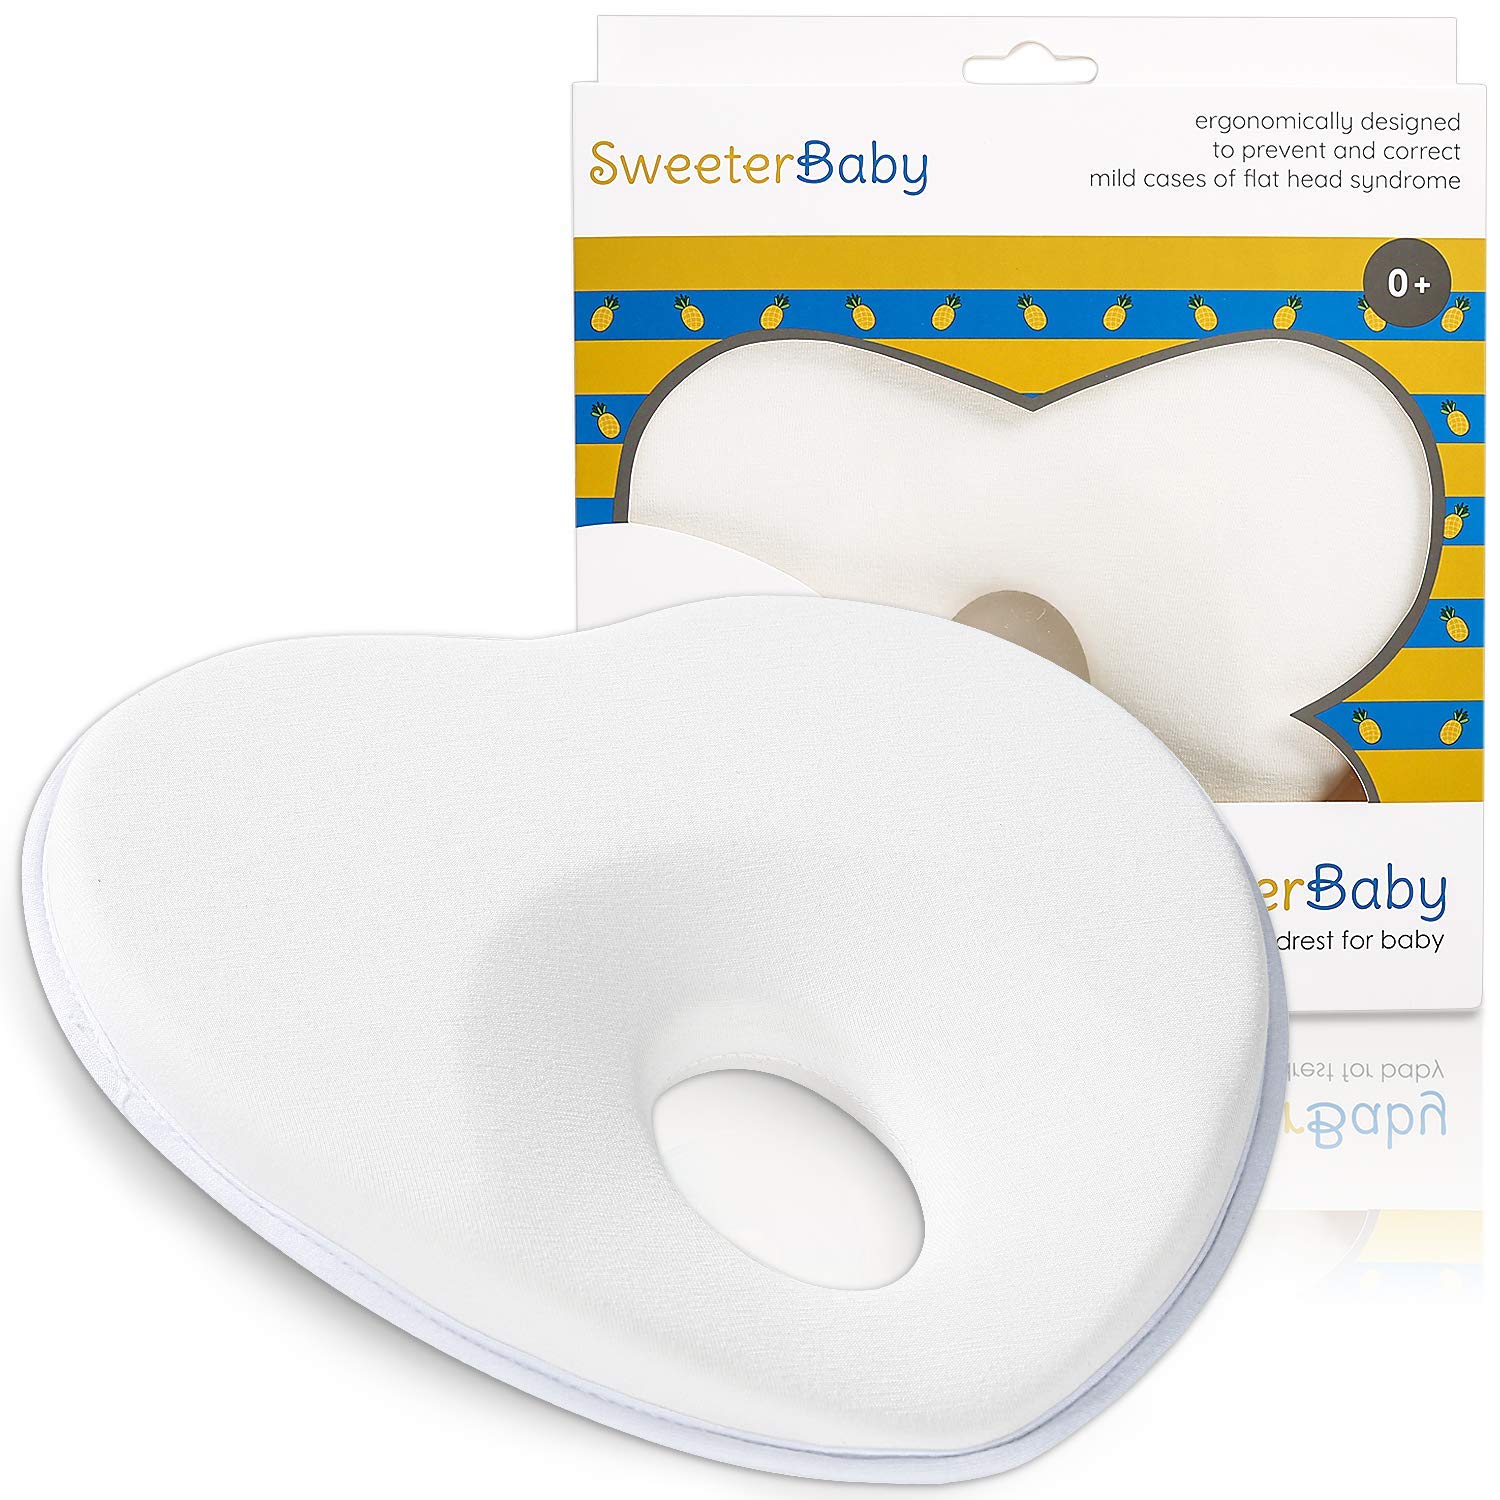 Sweeterbaby Best Baby Pillow for Flat Head Syndrome Prevention